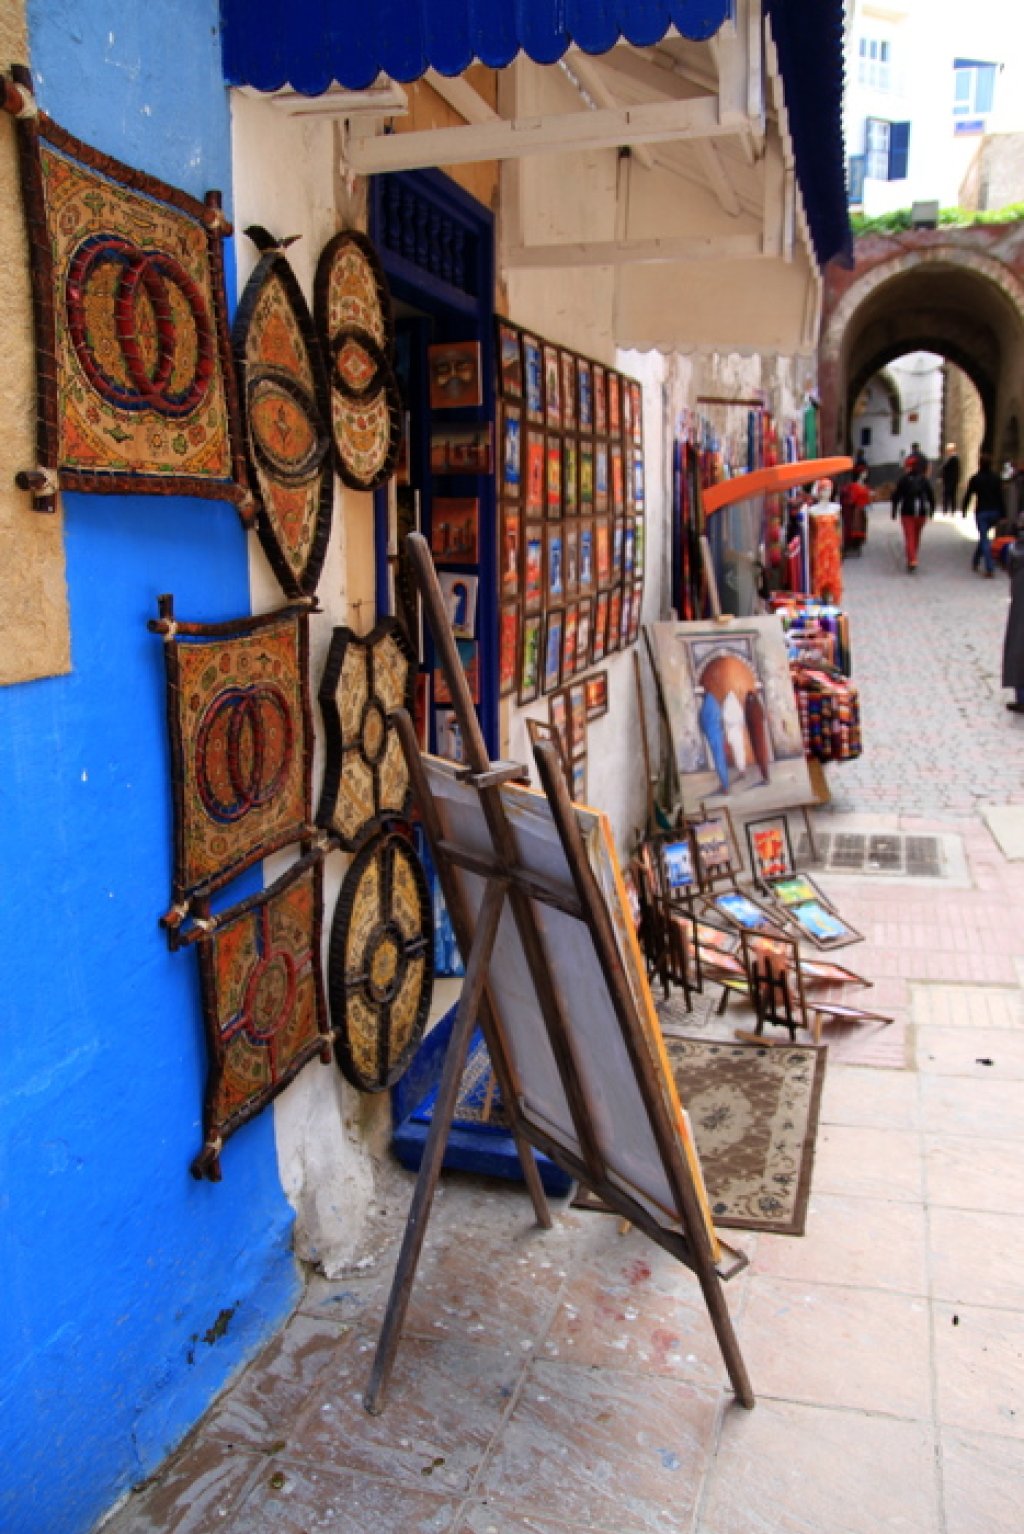 The narrow streets of Essaouira's old town are traditionally used to sell handicrafts and spices.